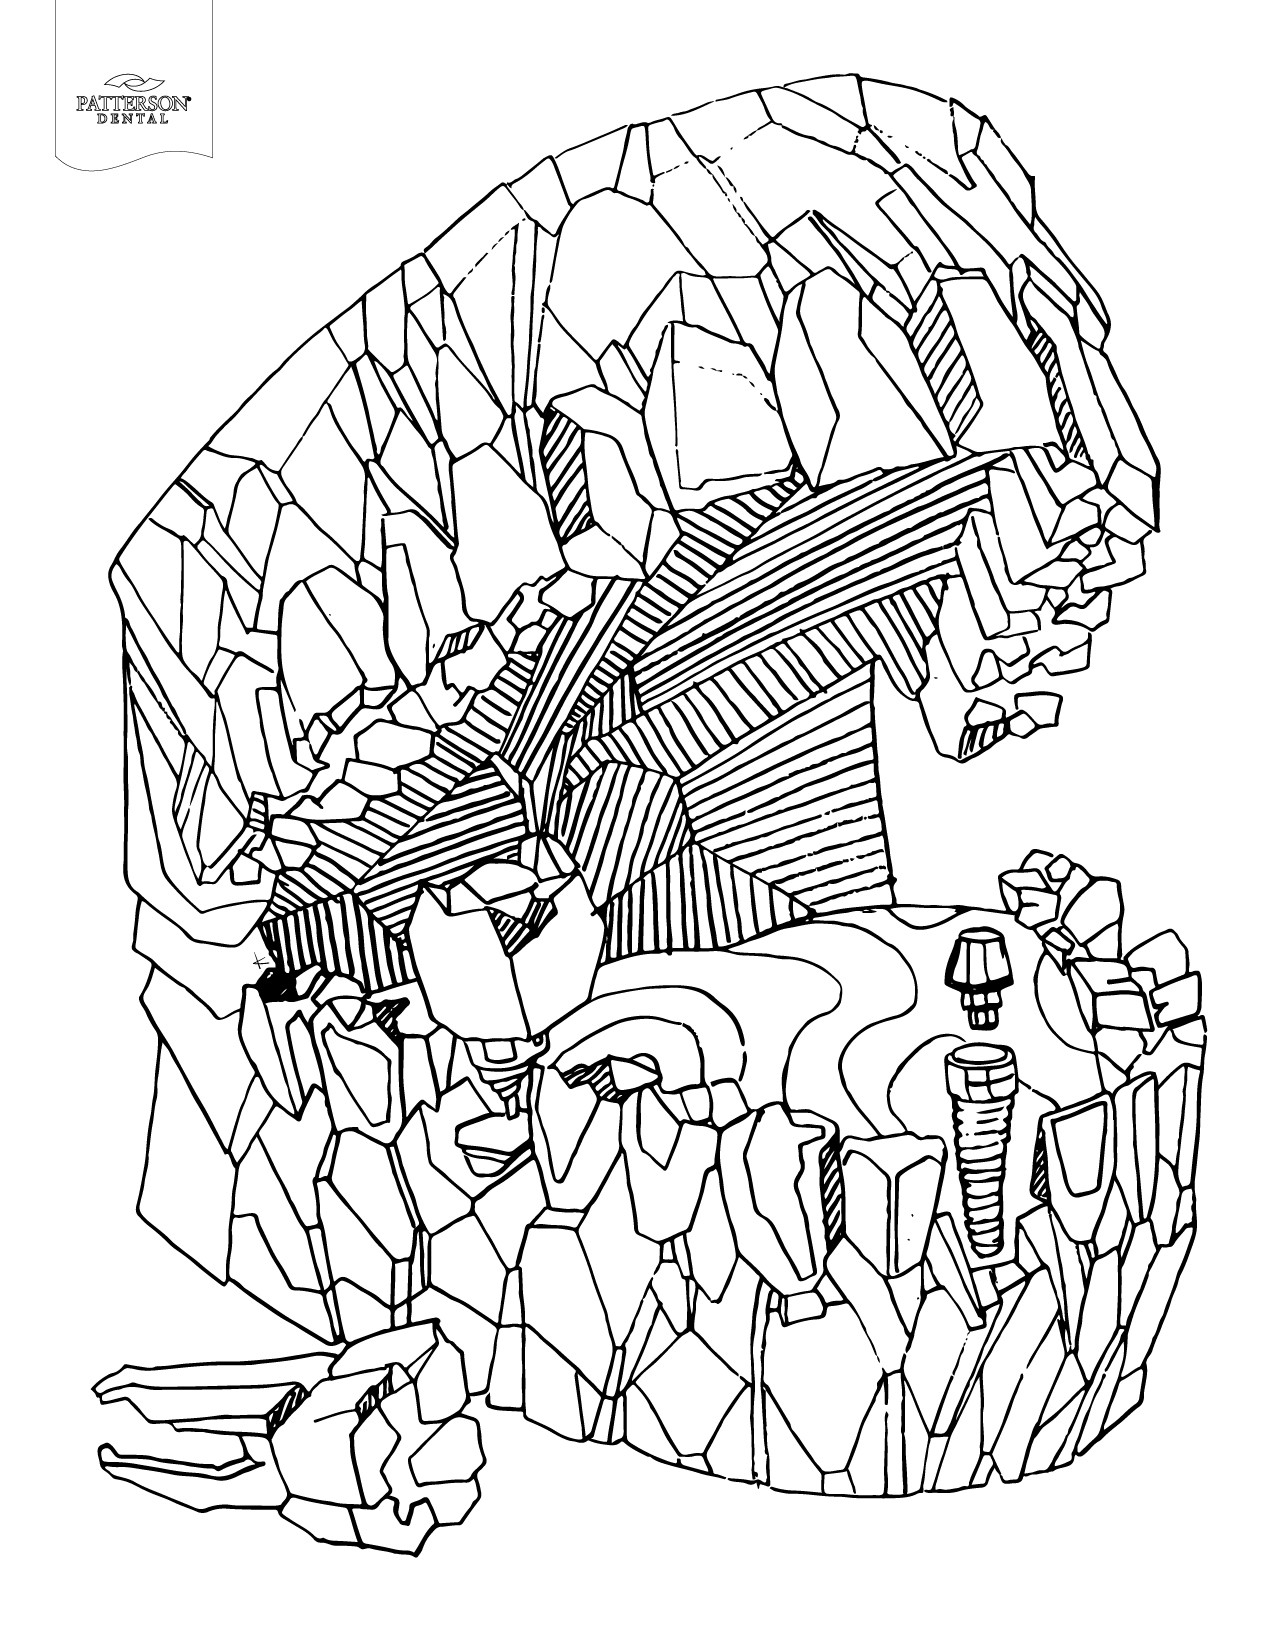 Adult Printable Coloring Pages
 10 Toothy Adult Coloring Pages [Printable] f The Cusp